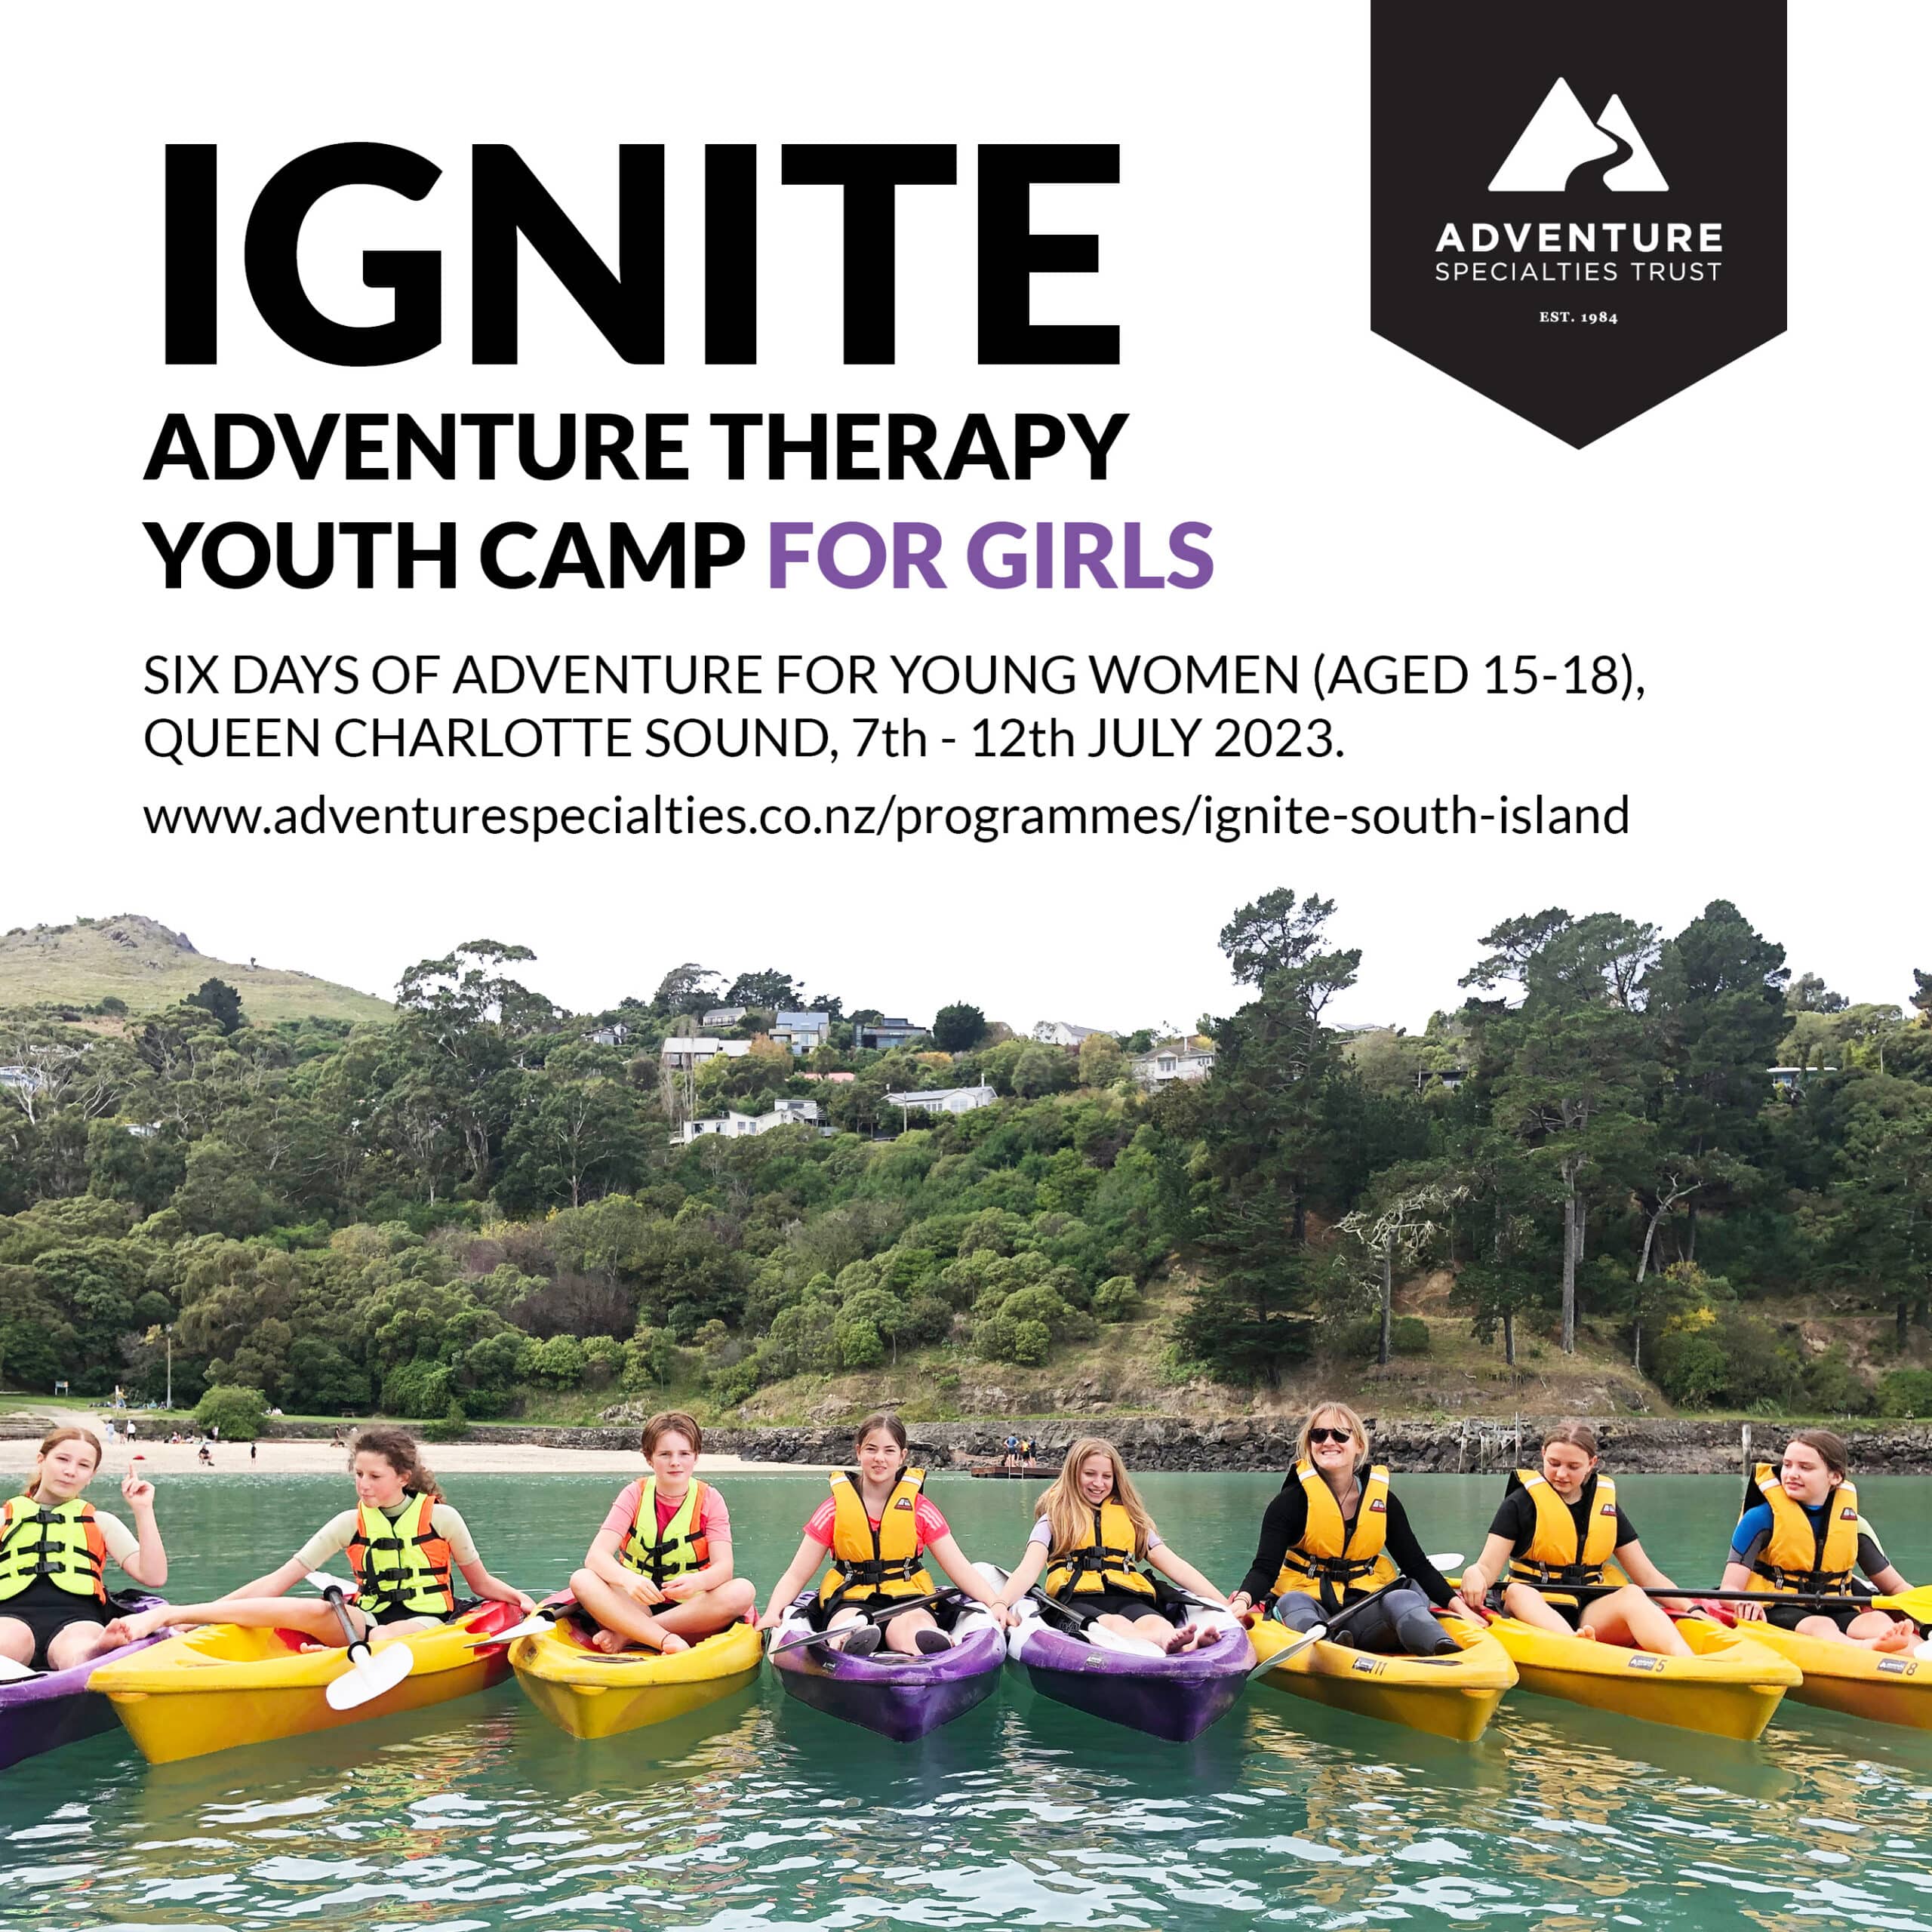 Build confidence on our youth camp, Ignite